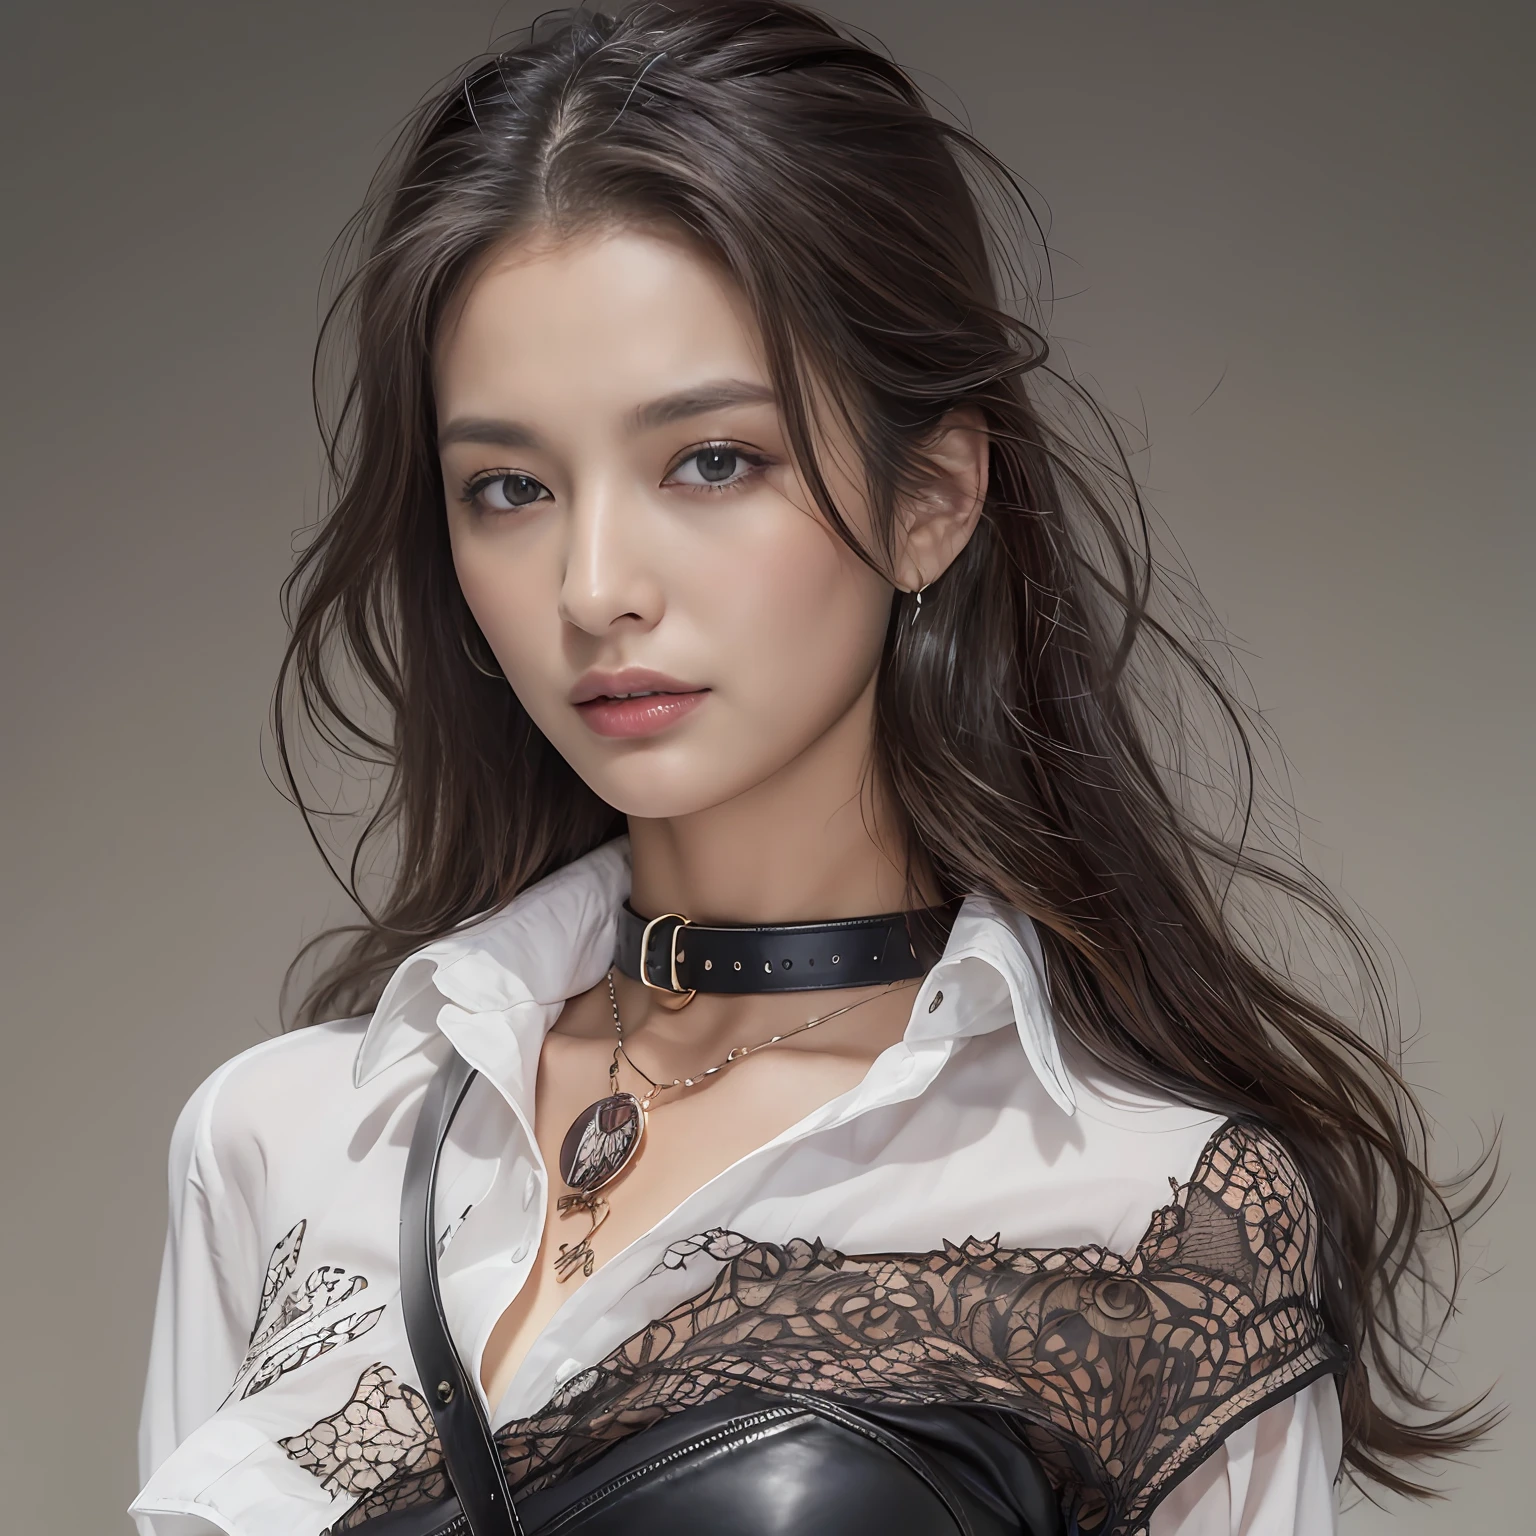 (top-quality、hight resolution、​masterpiece:1.3)、Tall and cute woman、Slender Abs、Dark brown hair styled in loose waves、 cute  face, beautiful countenance, (Lifelike face), Beautiful hairstyle, realisticeyes, beautiful detail, (real looking skin), Beautiful skins, enticing, The ultra -The high-definition, A hyper-realistic, ighly detailed, (small tits:1.3), (cleavage of the breast:0.8)、White button-up shirt、a belt、Black leather tight skirt、Like Emily O'Hara Ratajkowski Japan,breastsout、Wearing a pendant、White button-up shirt、a belt、Black leather tight skirt、(Modern architecture in background)、Details exquisitely rendered in the face and skin texture、A detailed eye、double eyelid